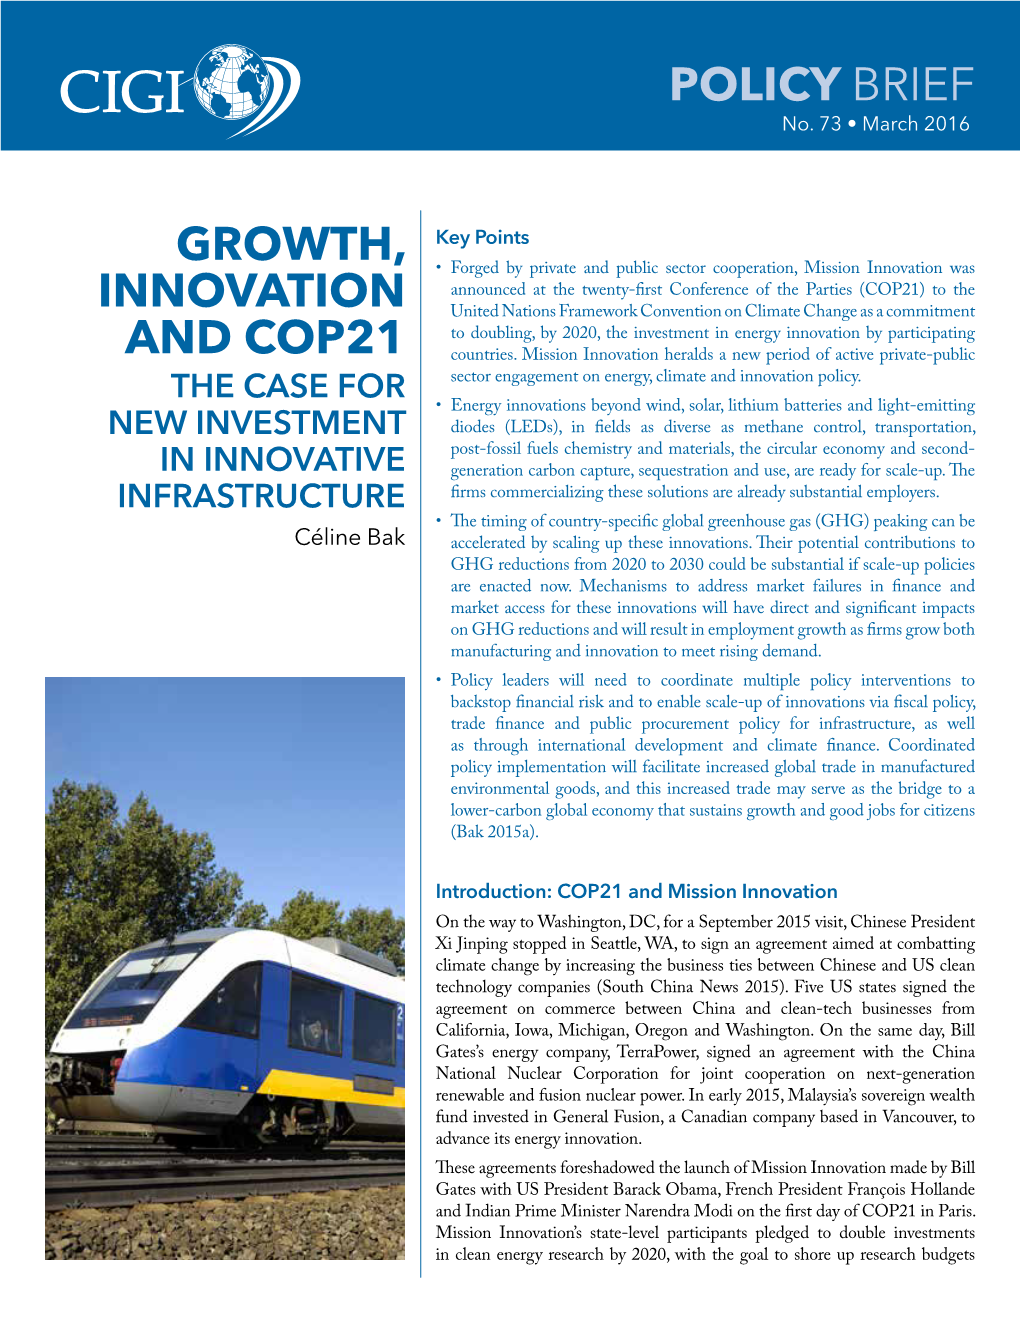 Growth, Innovation and Cop21 Policy Brief